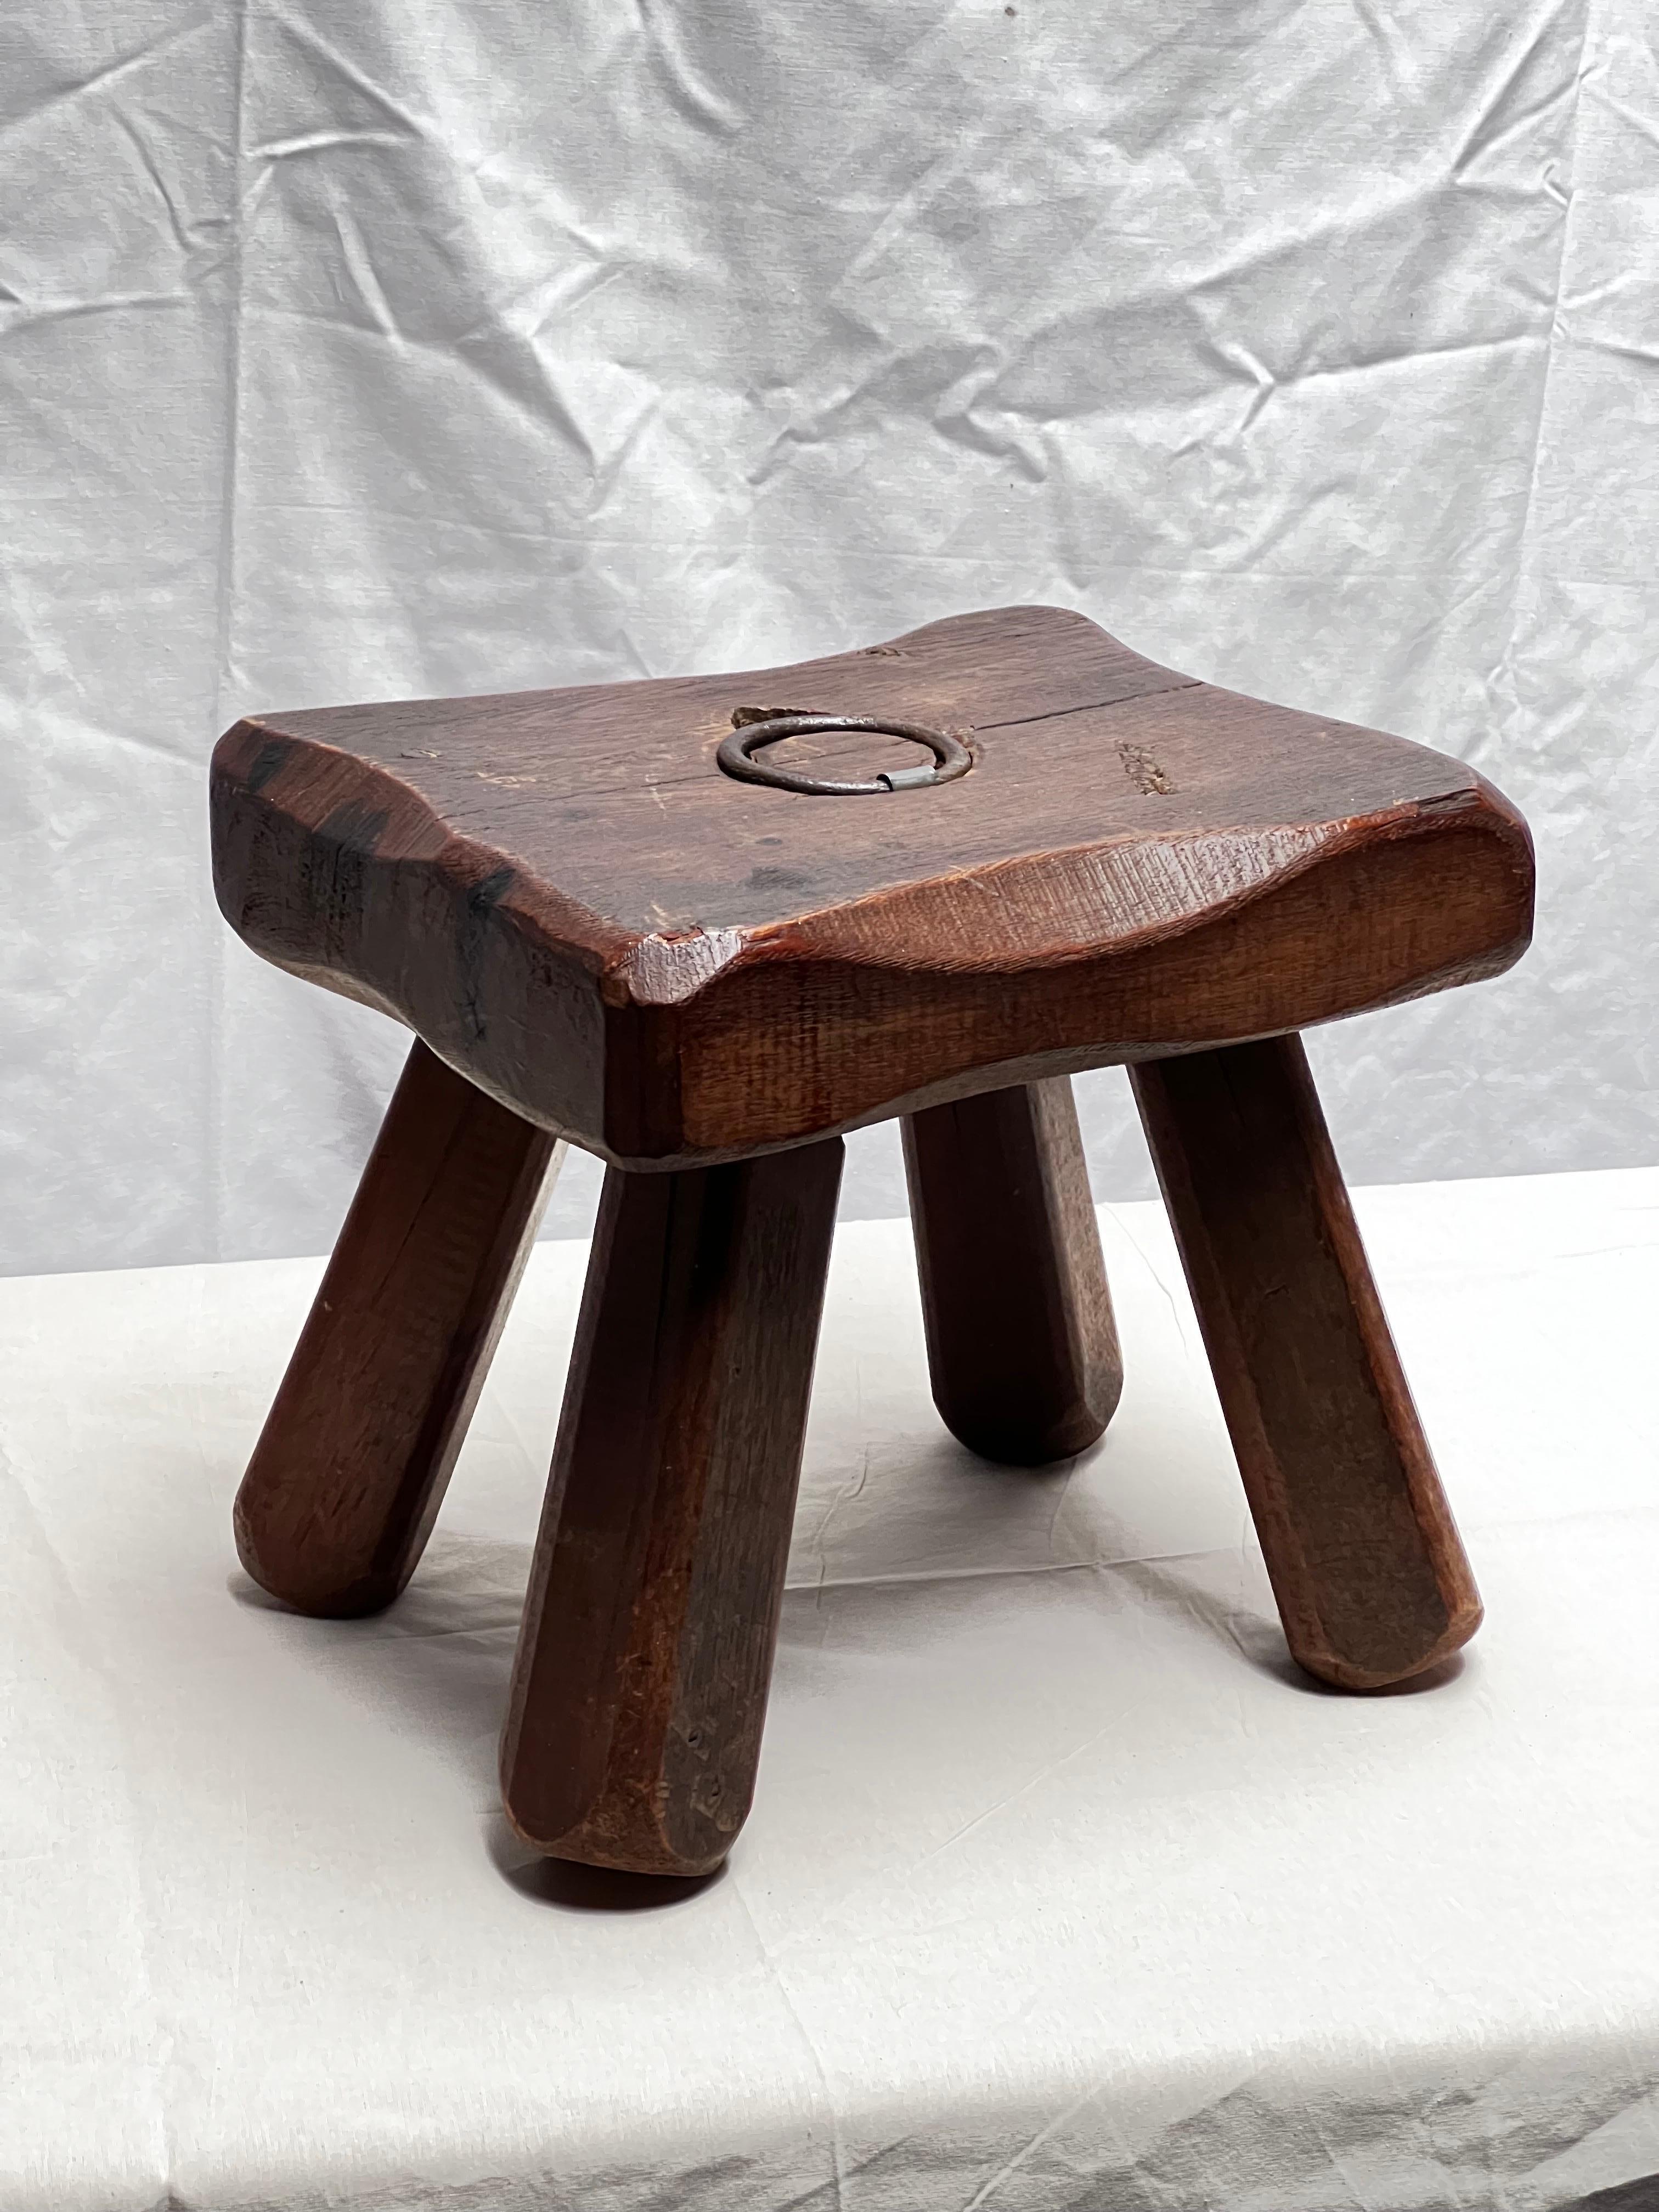 Hand-Crafted Strong French Stained Wooden Stool with handle circa 1960 Brutalist